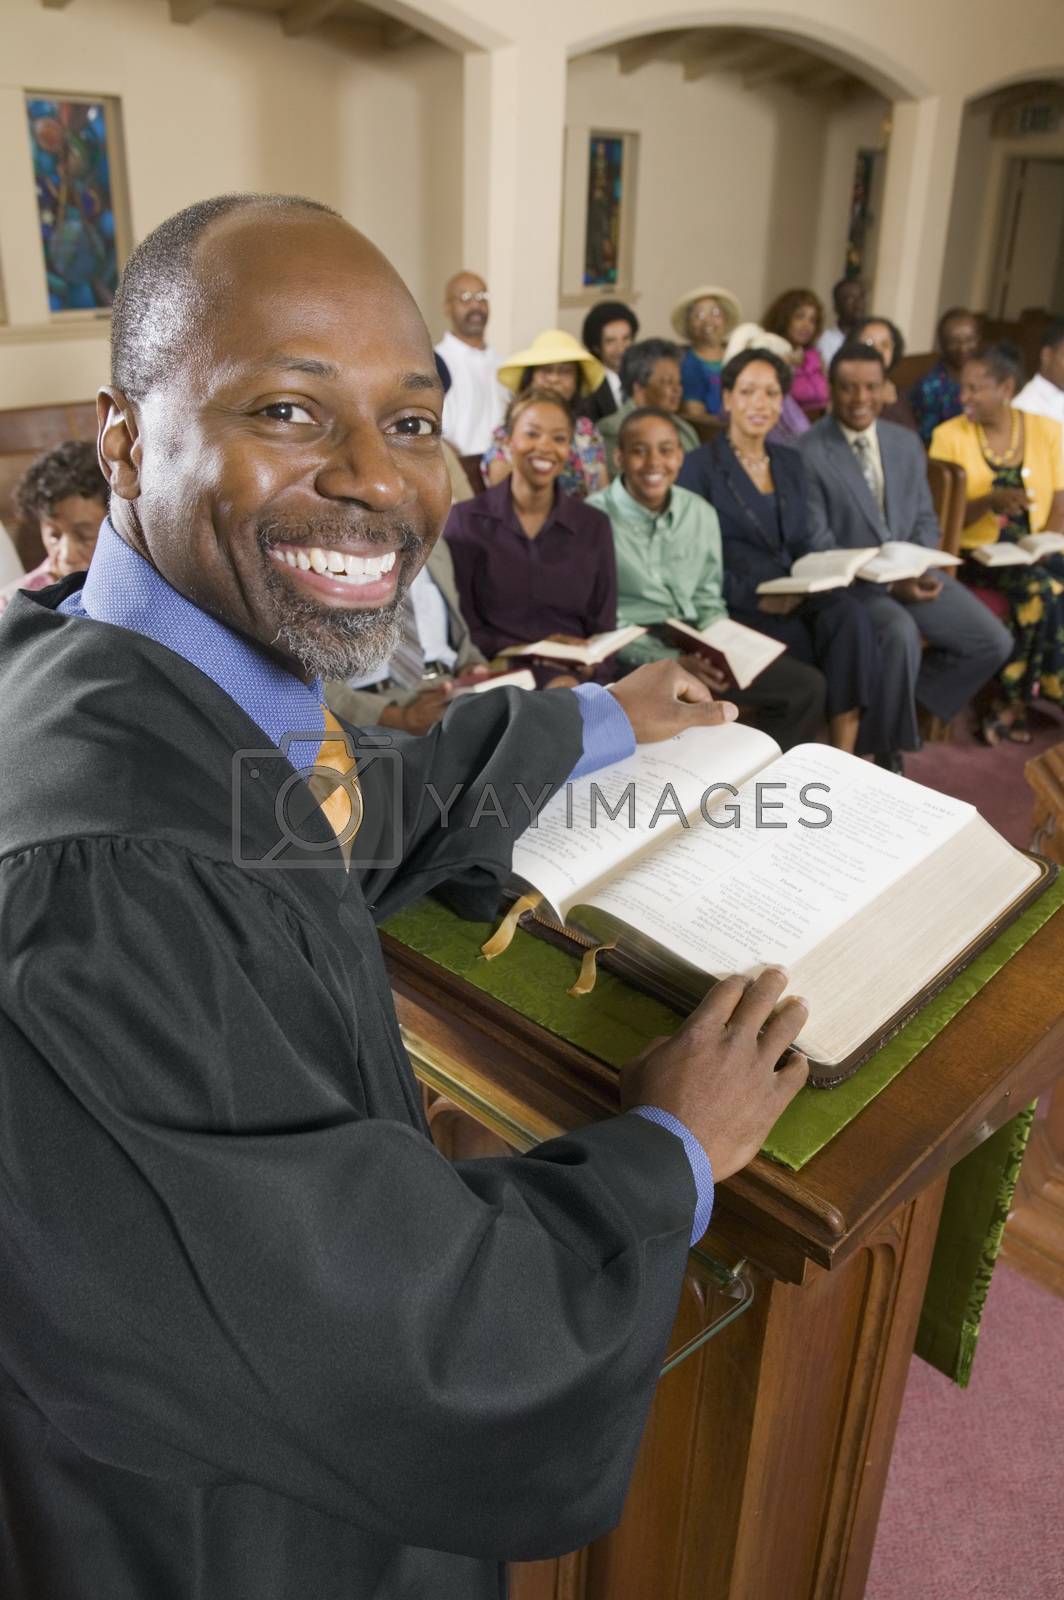 Royalty free image of Preacher at altar with Bible preaching to Congregation portrait by moodboard